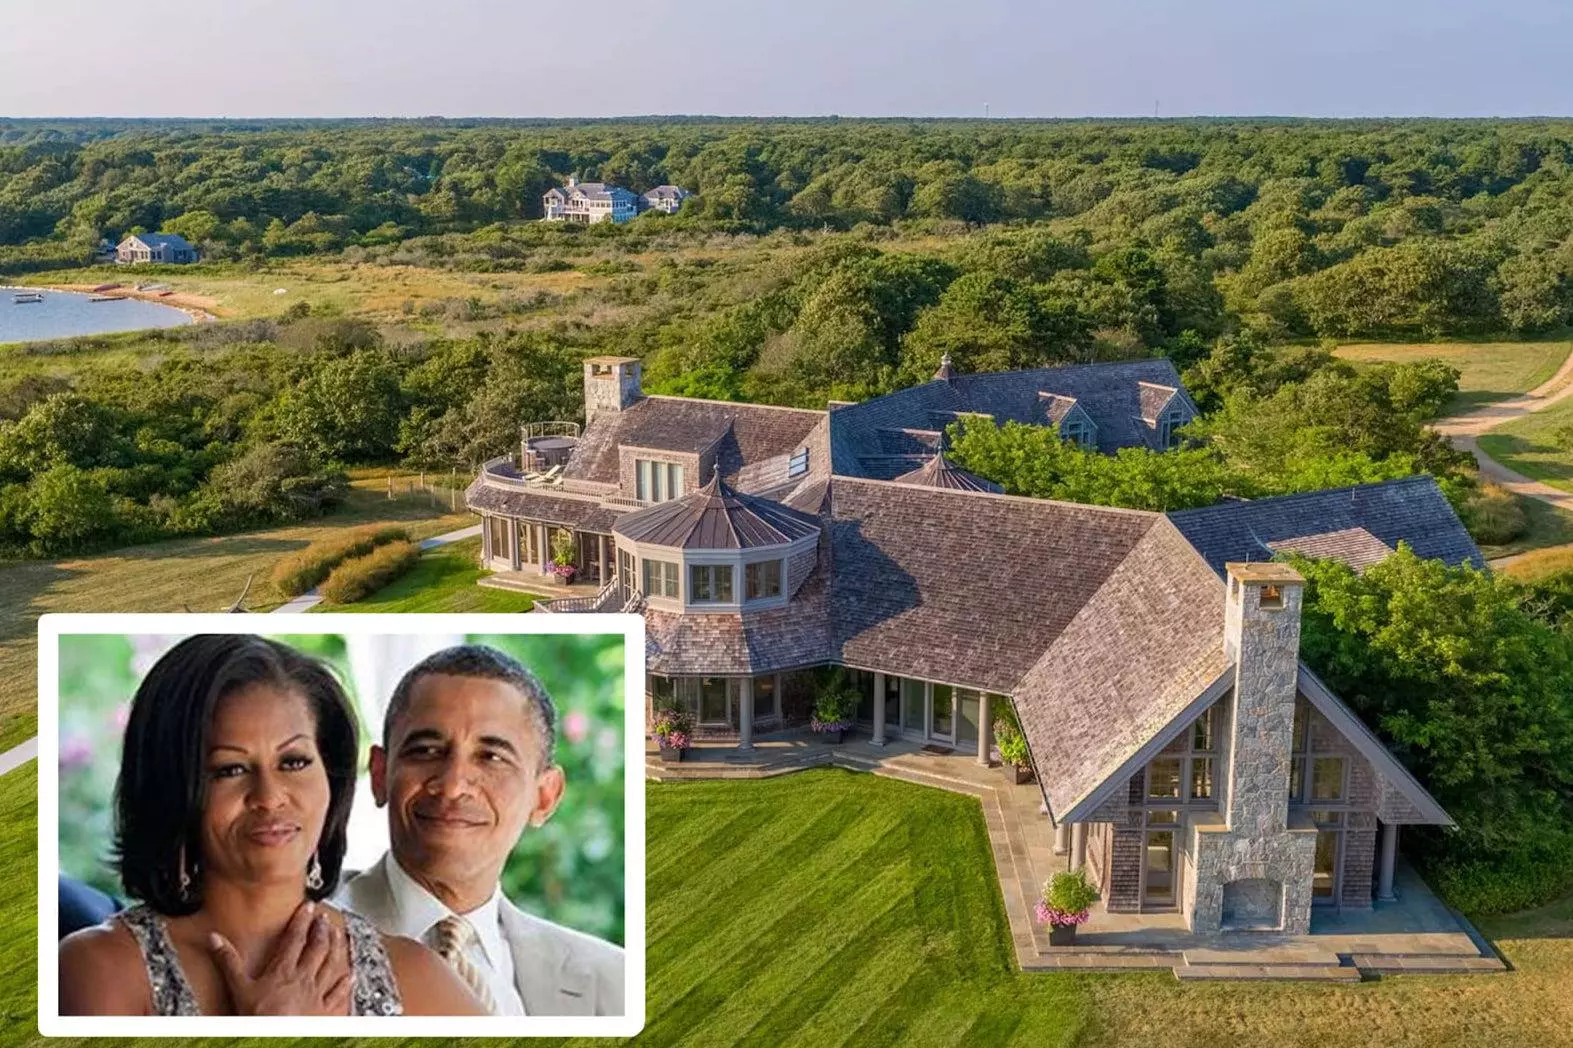 The Obamas just dropped $12M on a 29-acre estate on Martha's Vineyard in Massachusetts. Take a tour inside this massive castle!